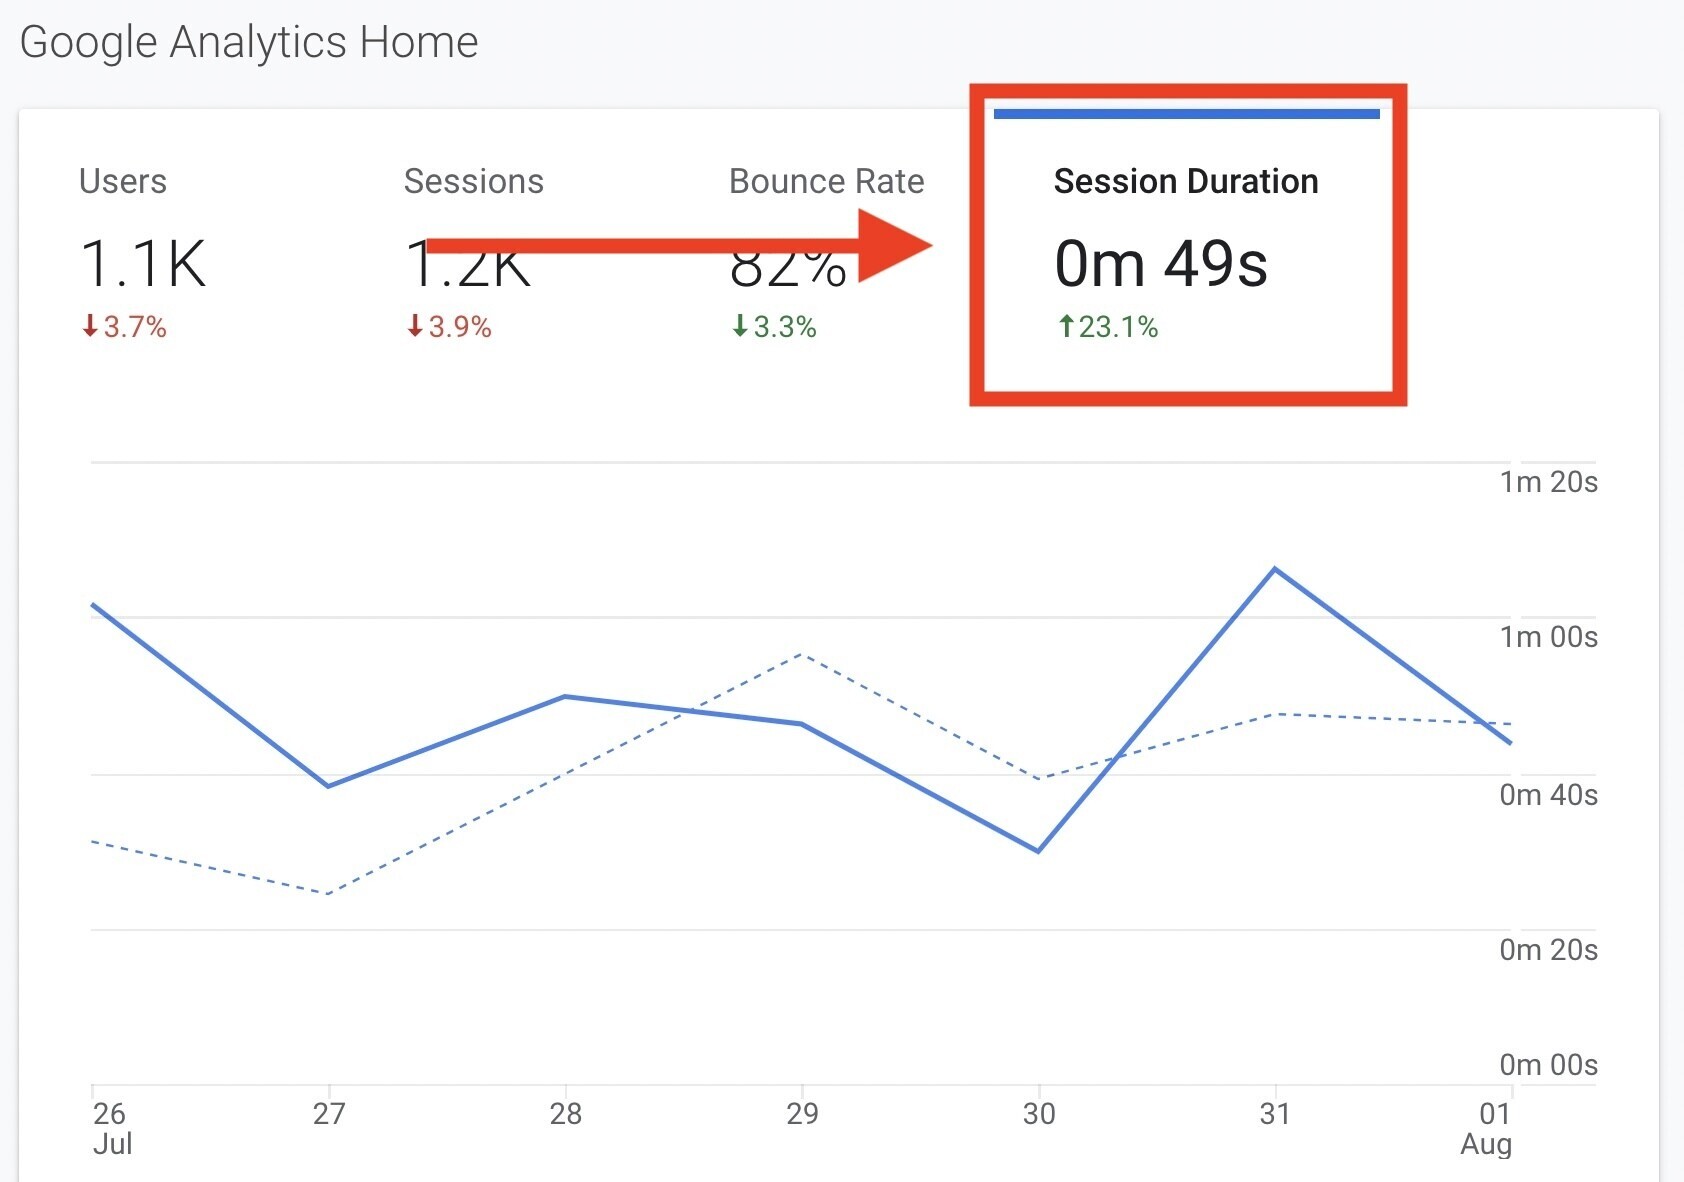 Session duration in Google Analytics